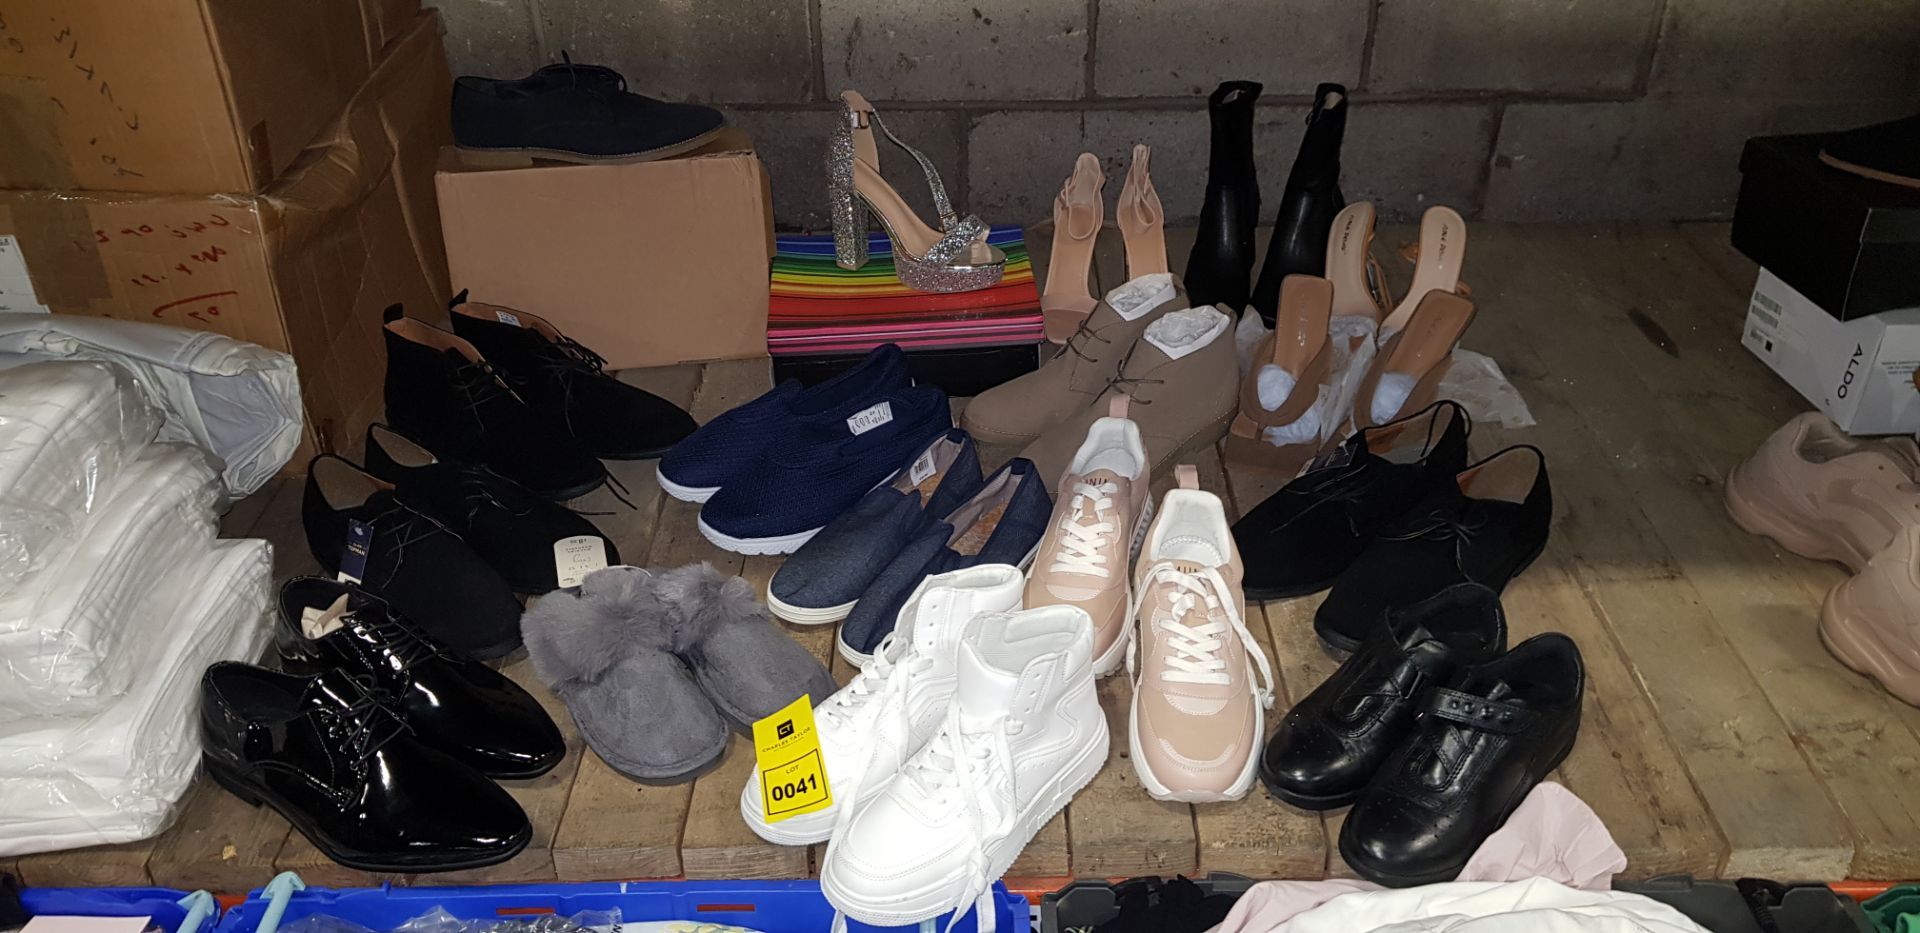 17 X PIECE BRAND NEW MIXED SHOE LOT CONTAINING TOPMAN FORMAL SHOES, MINIMAL TRAINERS, TOPMAN